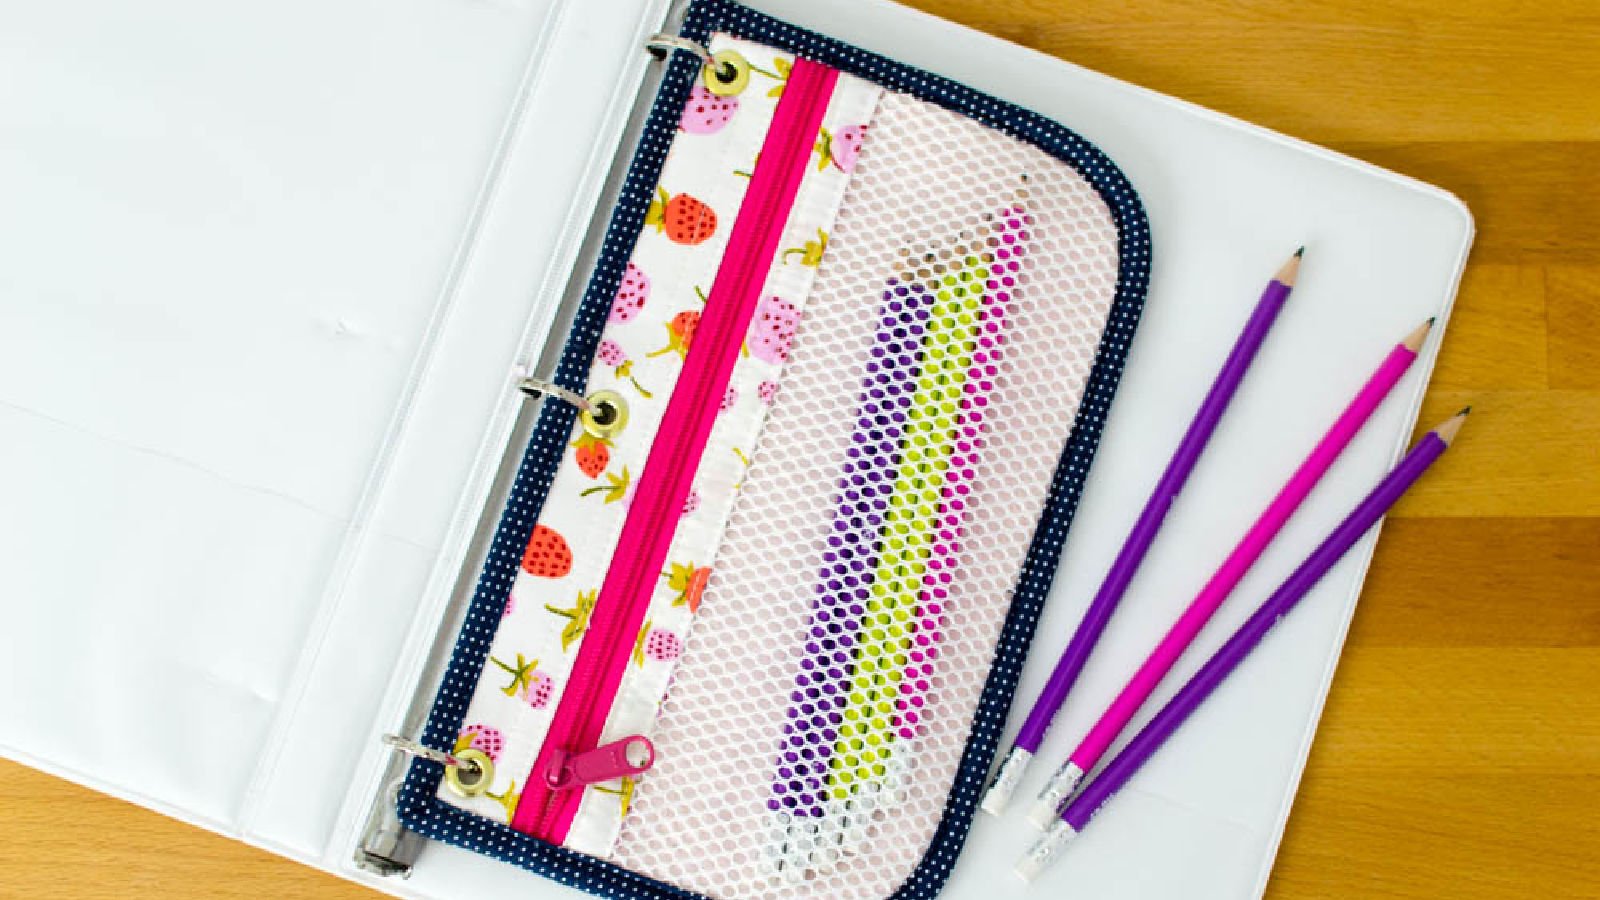 <p>Here, I’ll show you how to do a mash-up of the previous two patterns to make a <a href="https://sewcanshe.com/2018-7-12-show-off-saturday-sewing-3-ring-pencil-pouches/" rel="noreferrer noopener">3-ring binder pencil pouch</a> with grommets and mesh (or vinyl)!</p>